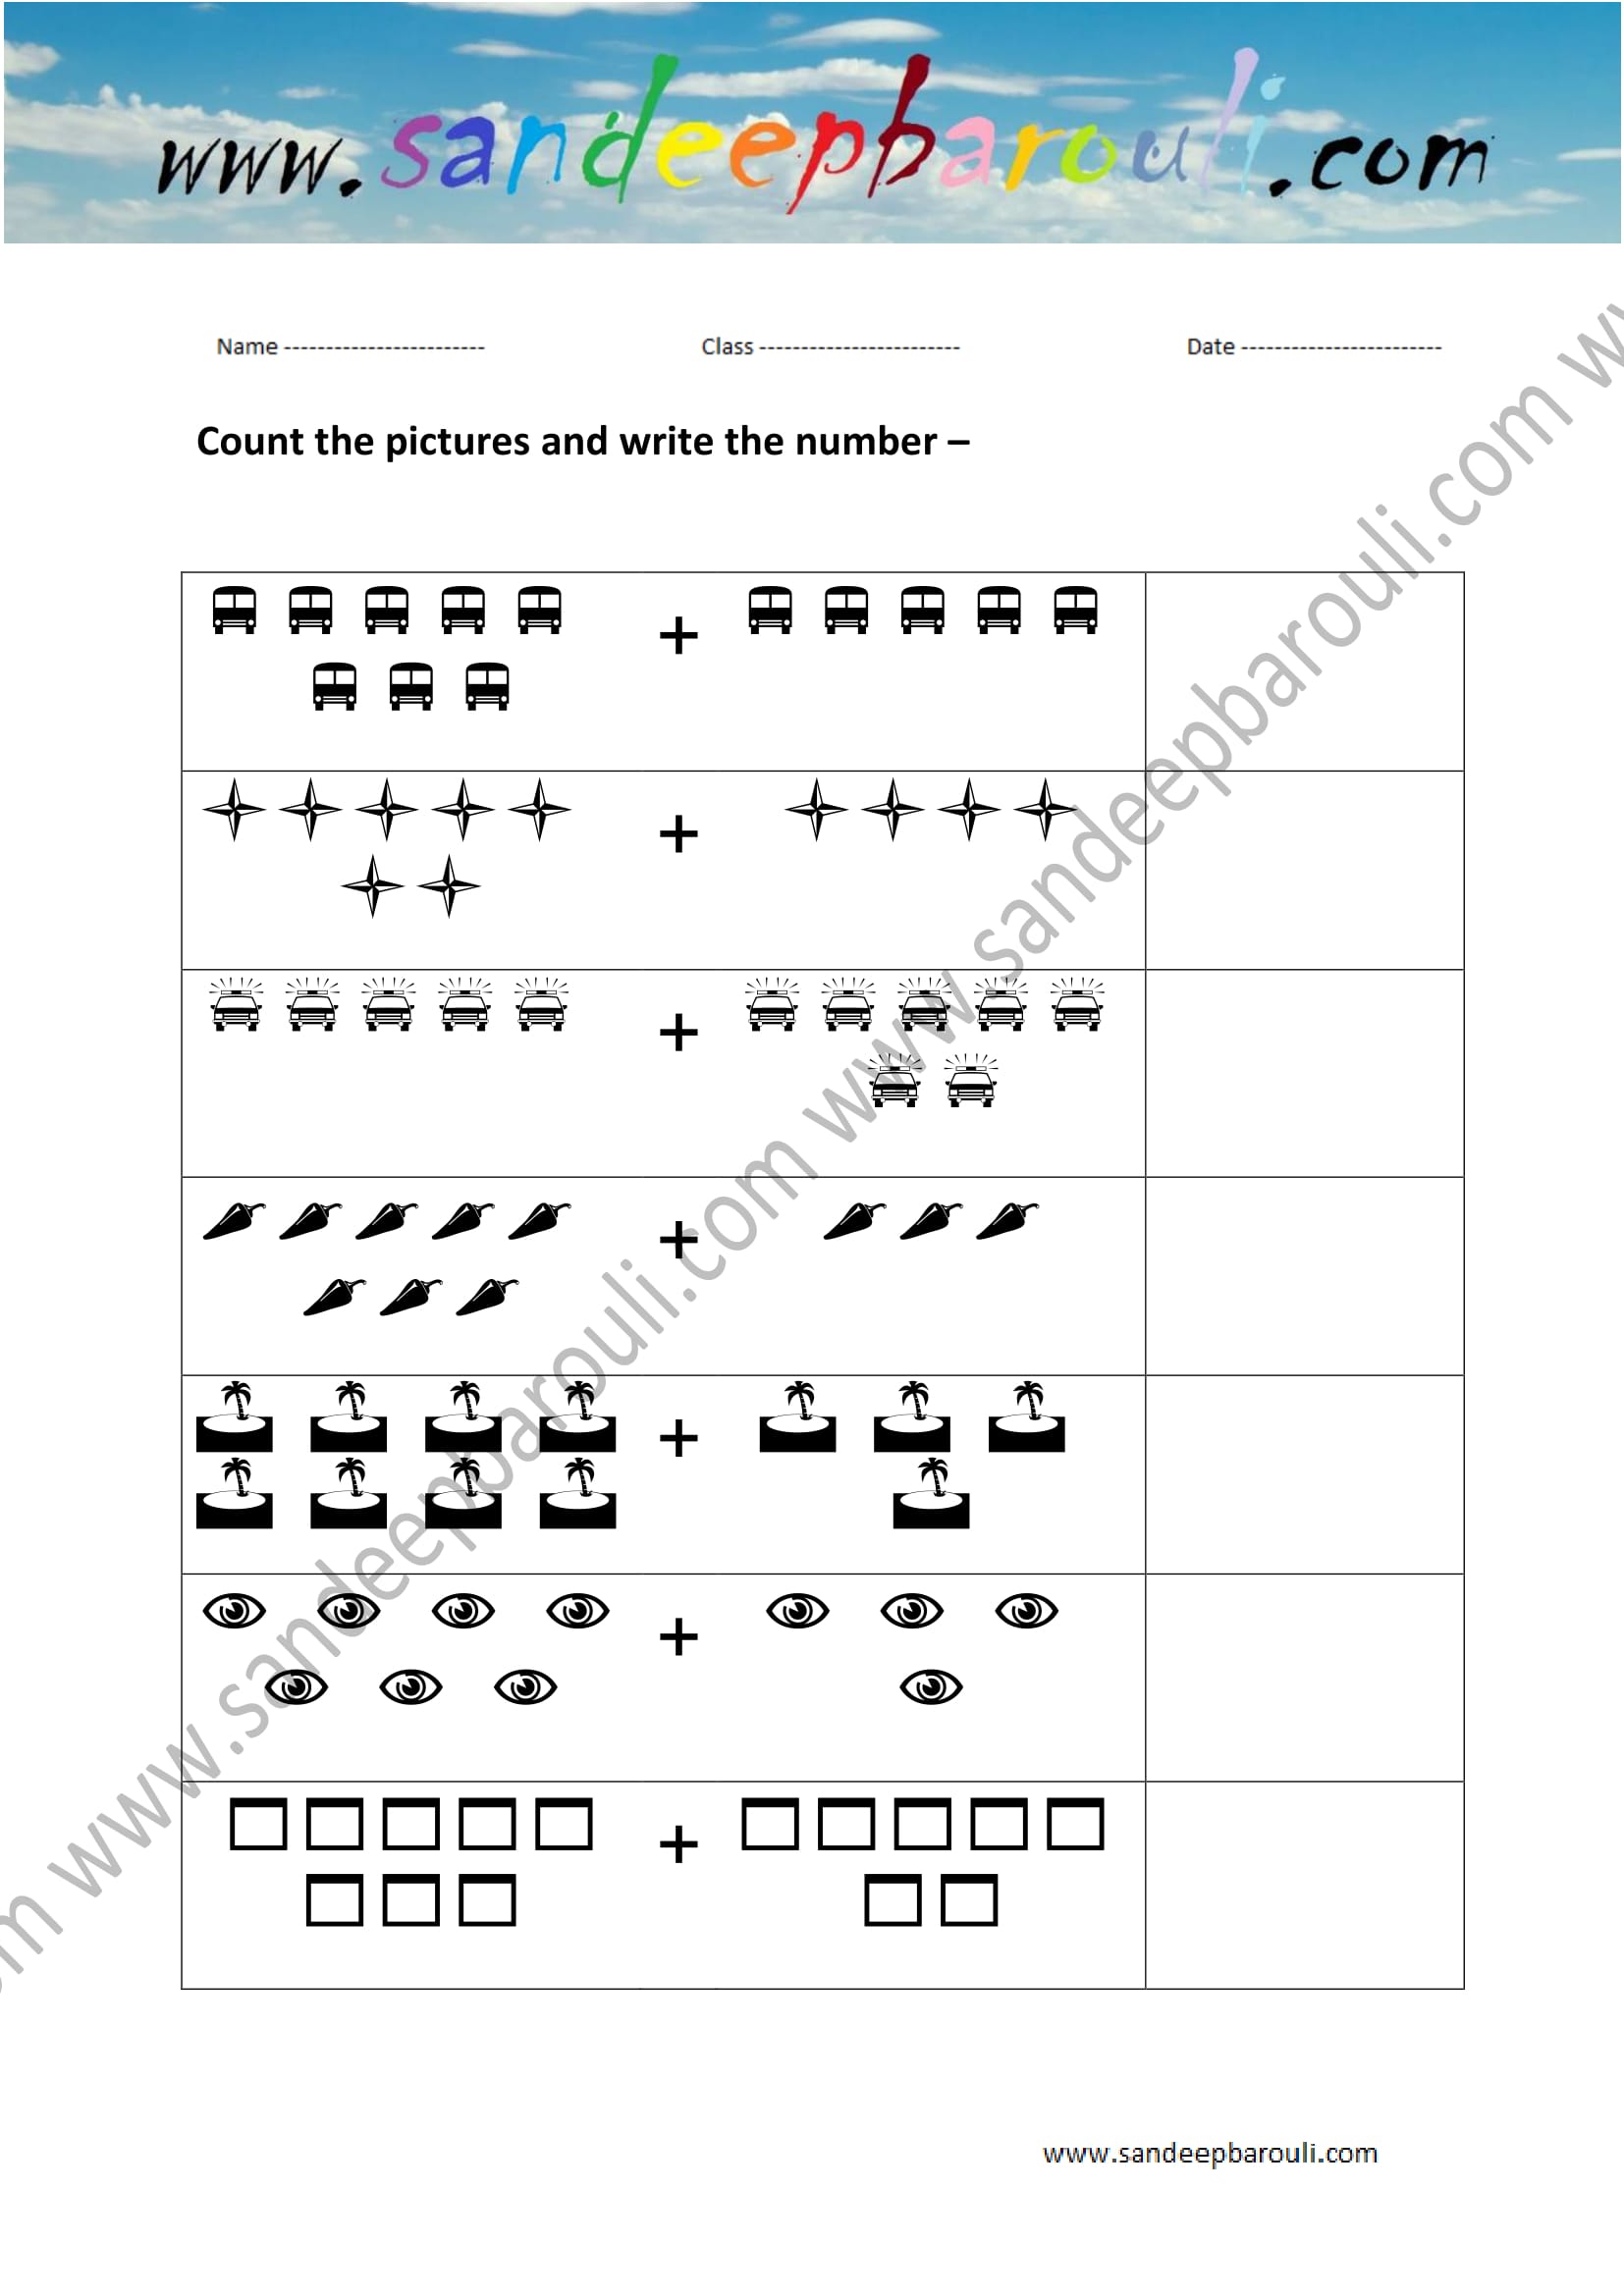 Count the Picture and Write the Number Worksheet (1)